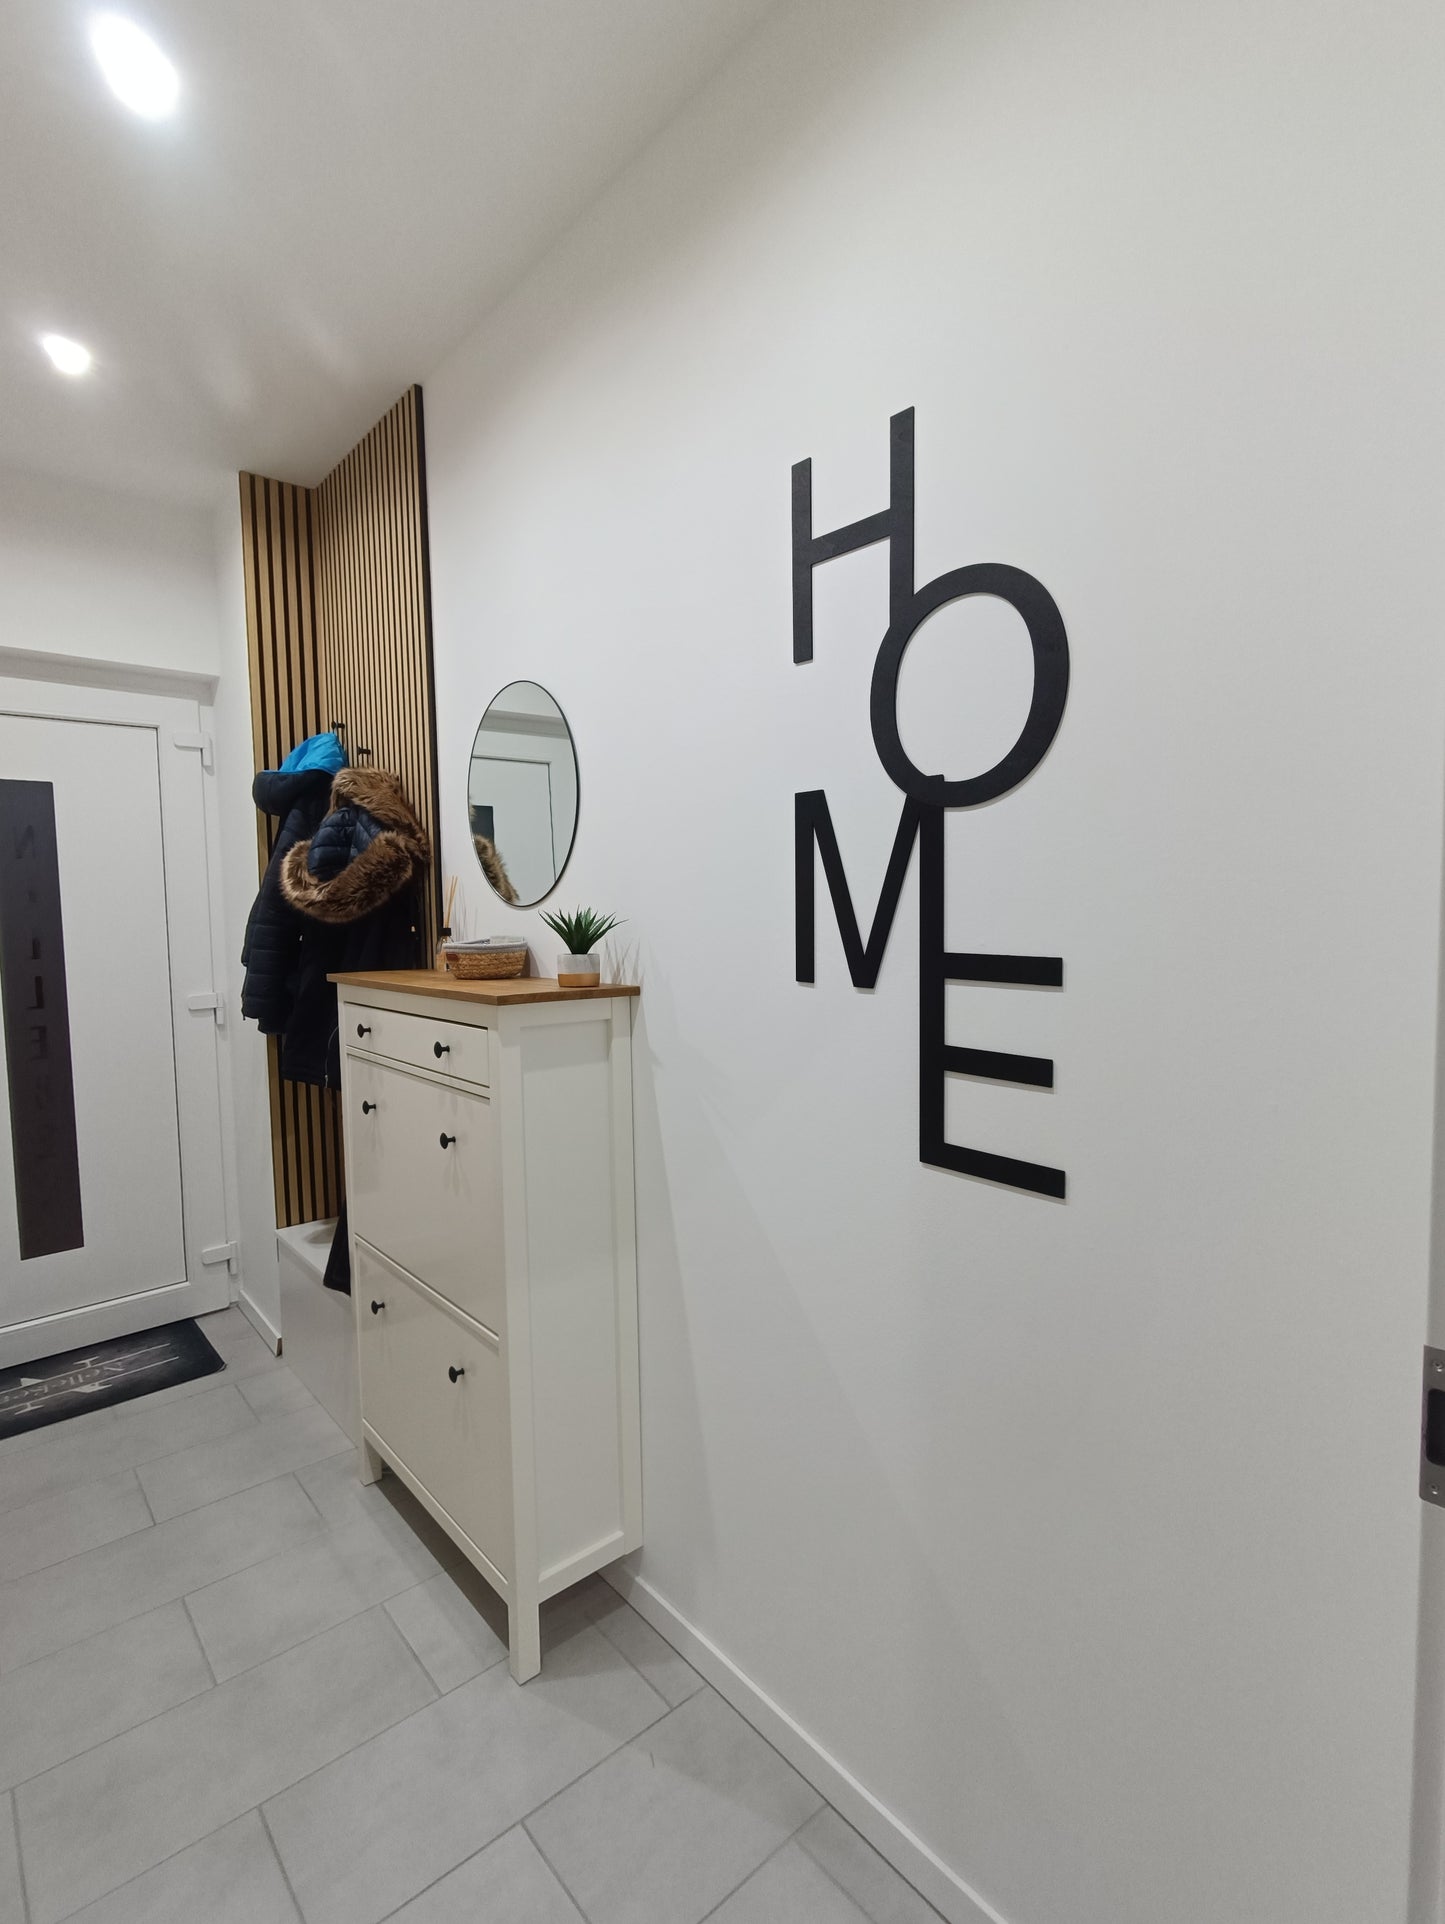 Lettering "HOME" made of wood/wall decoration/decor for the hallway/wall decoration made of wood/decor entrance area